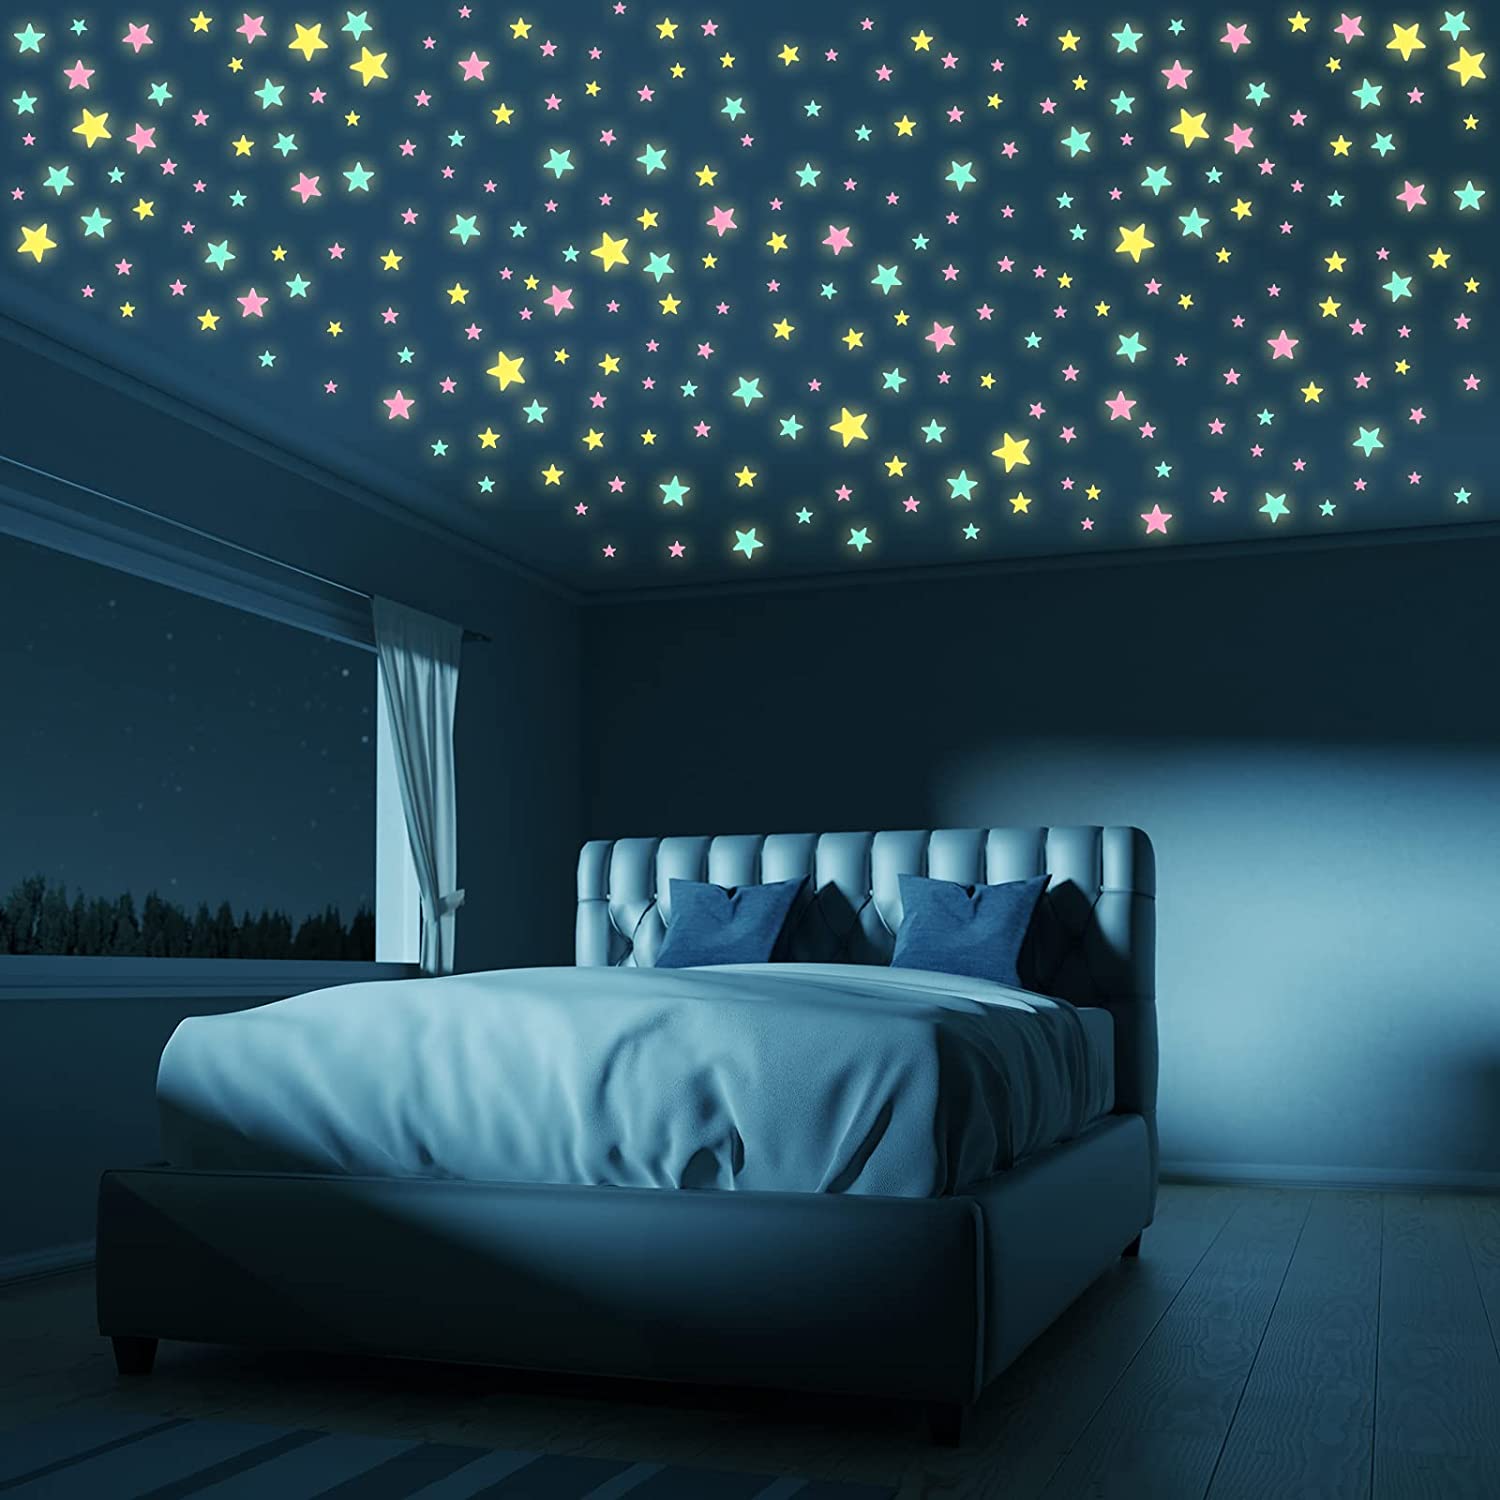 Glow in The Dark Stars - Glow Stars Stickers for Ceiling,Self Adhesive 3D  Glowing Stars and Moon for Starry Sky,Wall Decals for Kids Rooms,Wall